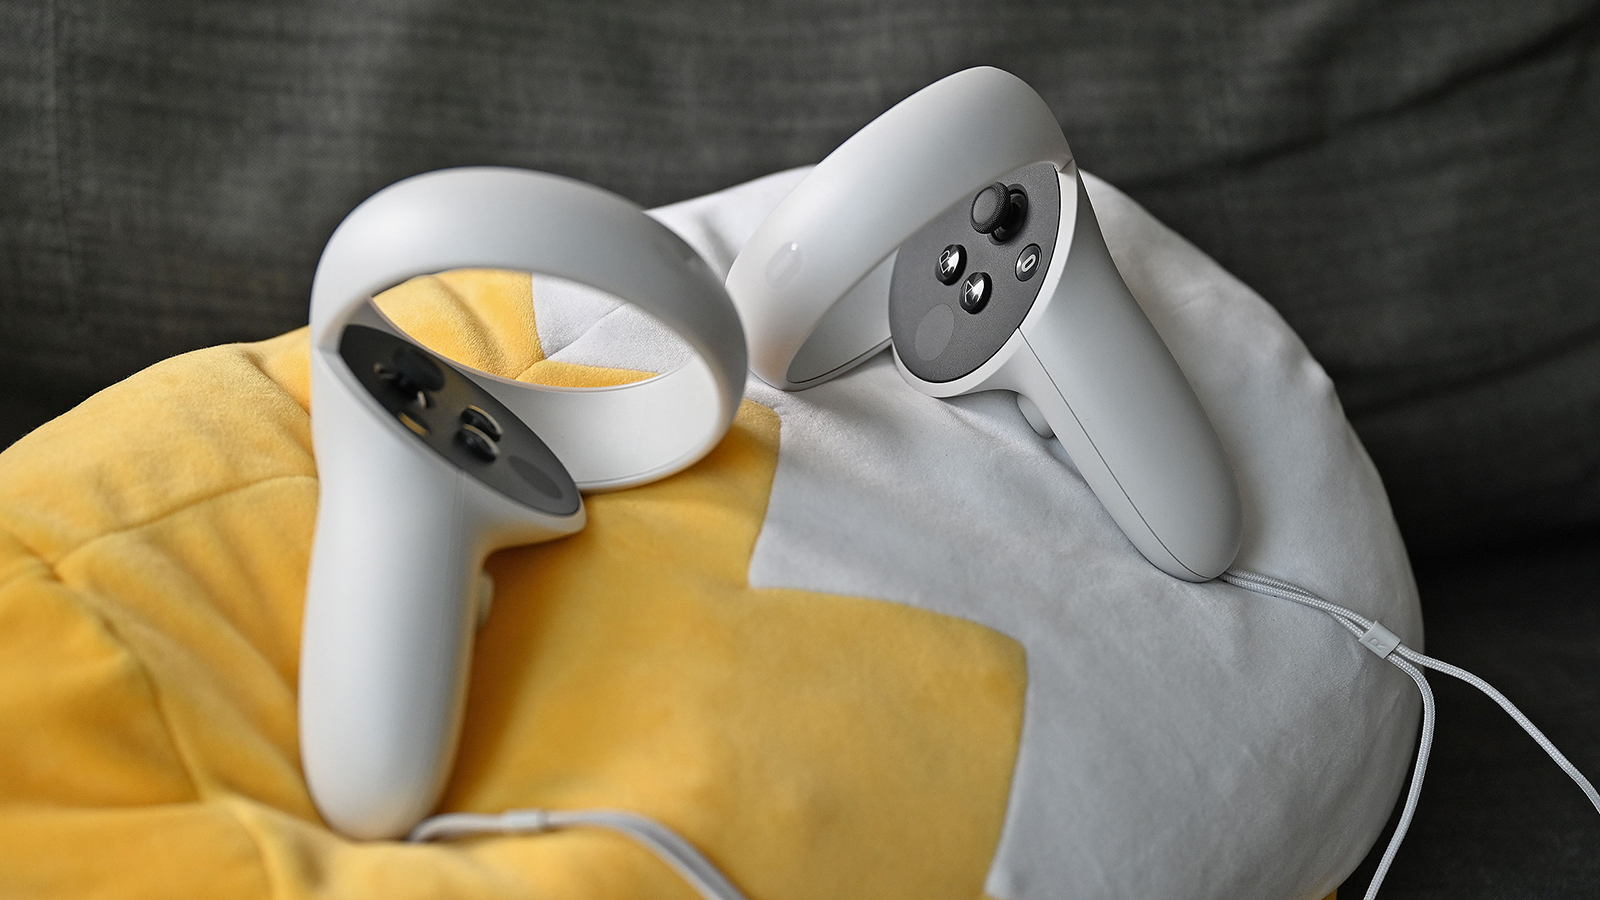 The new Touch controllers. (Photo: Sam Rutherford/Gizmodo)